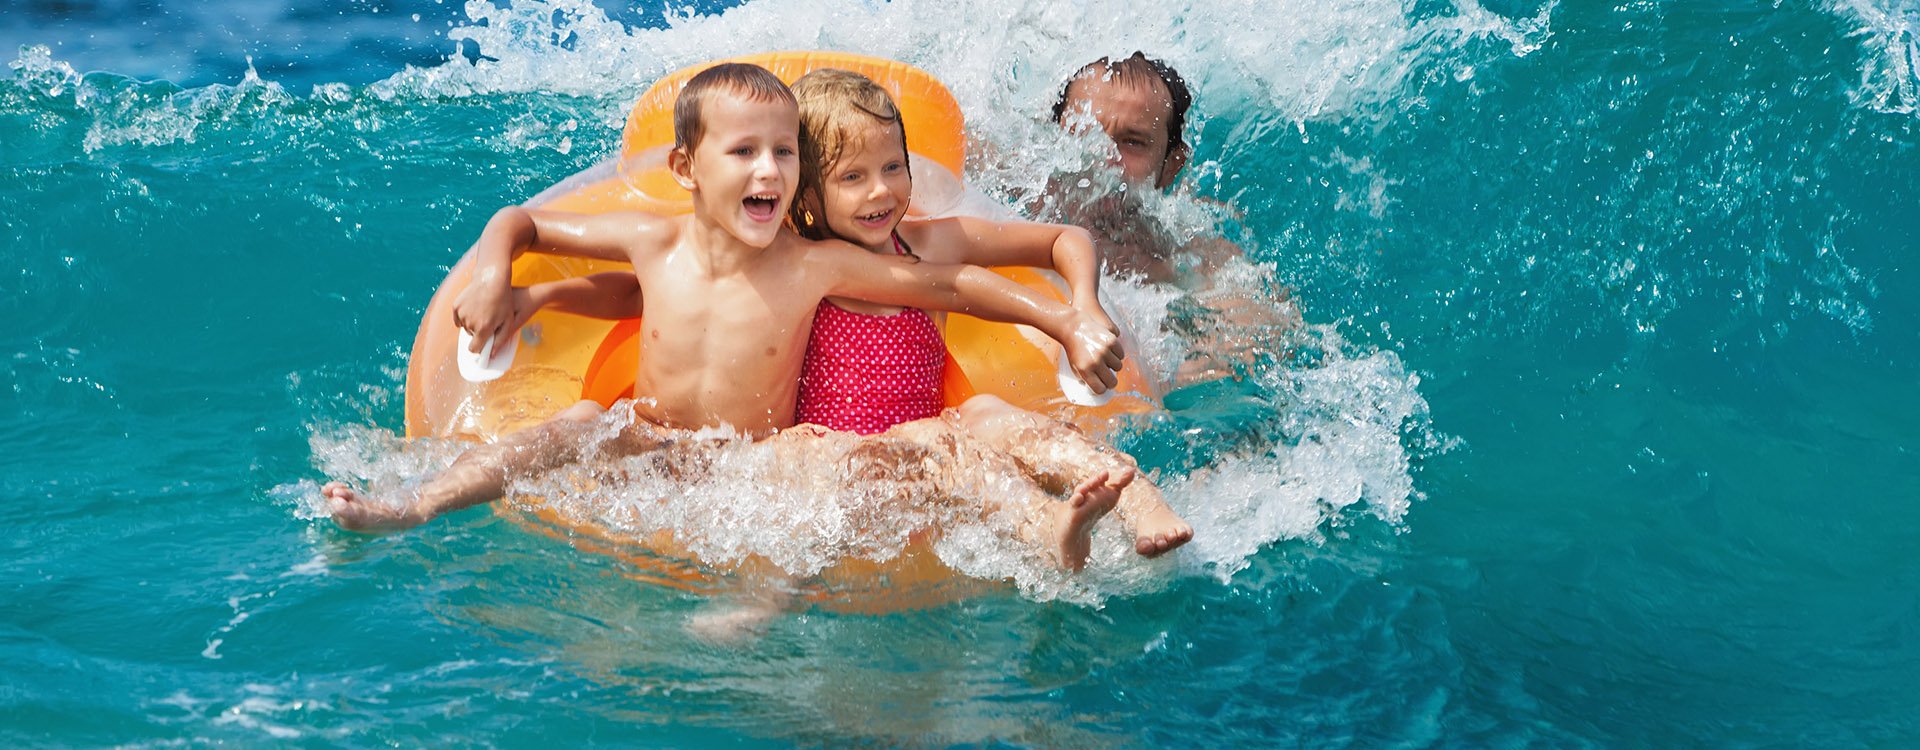 Happy kids have fun in sea surf on beach. Joyful couple of children on inflatable ring ride on breaking wave